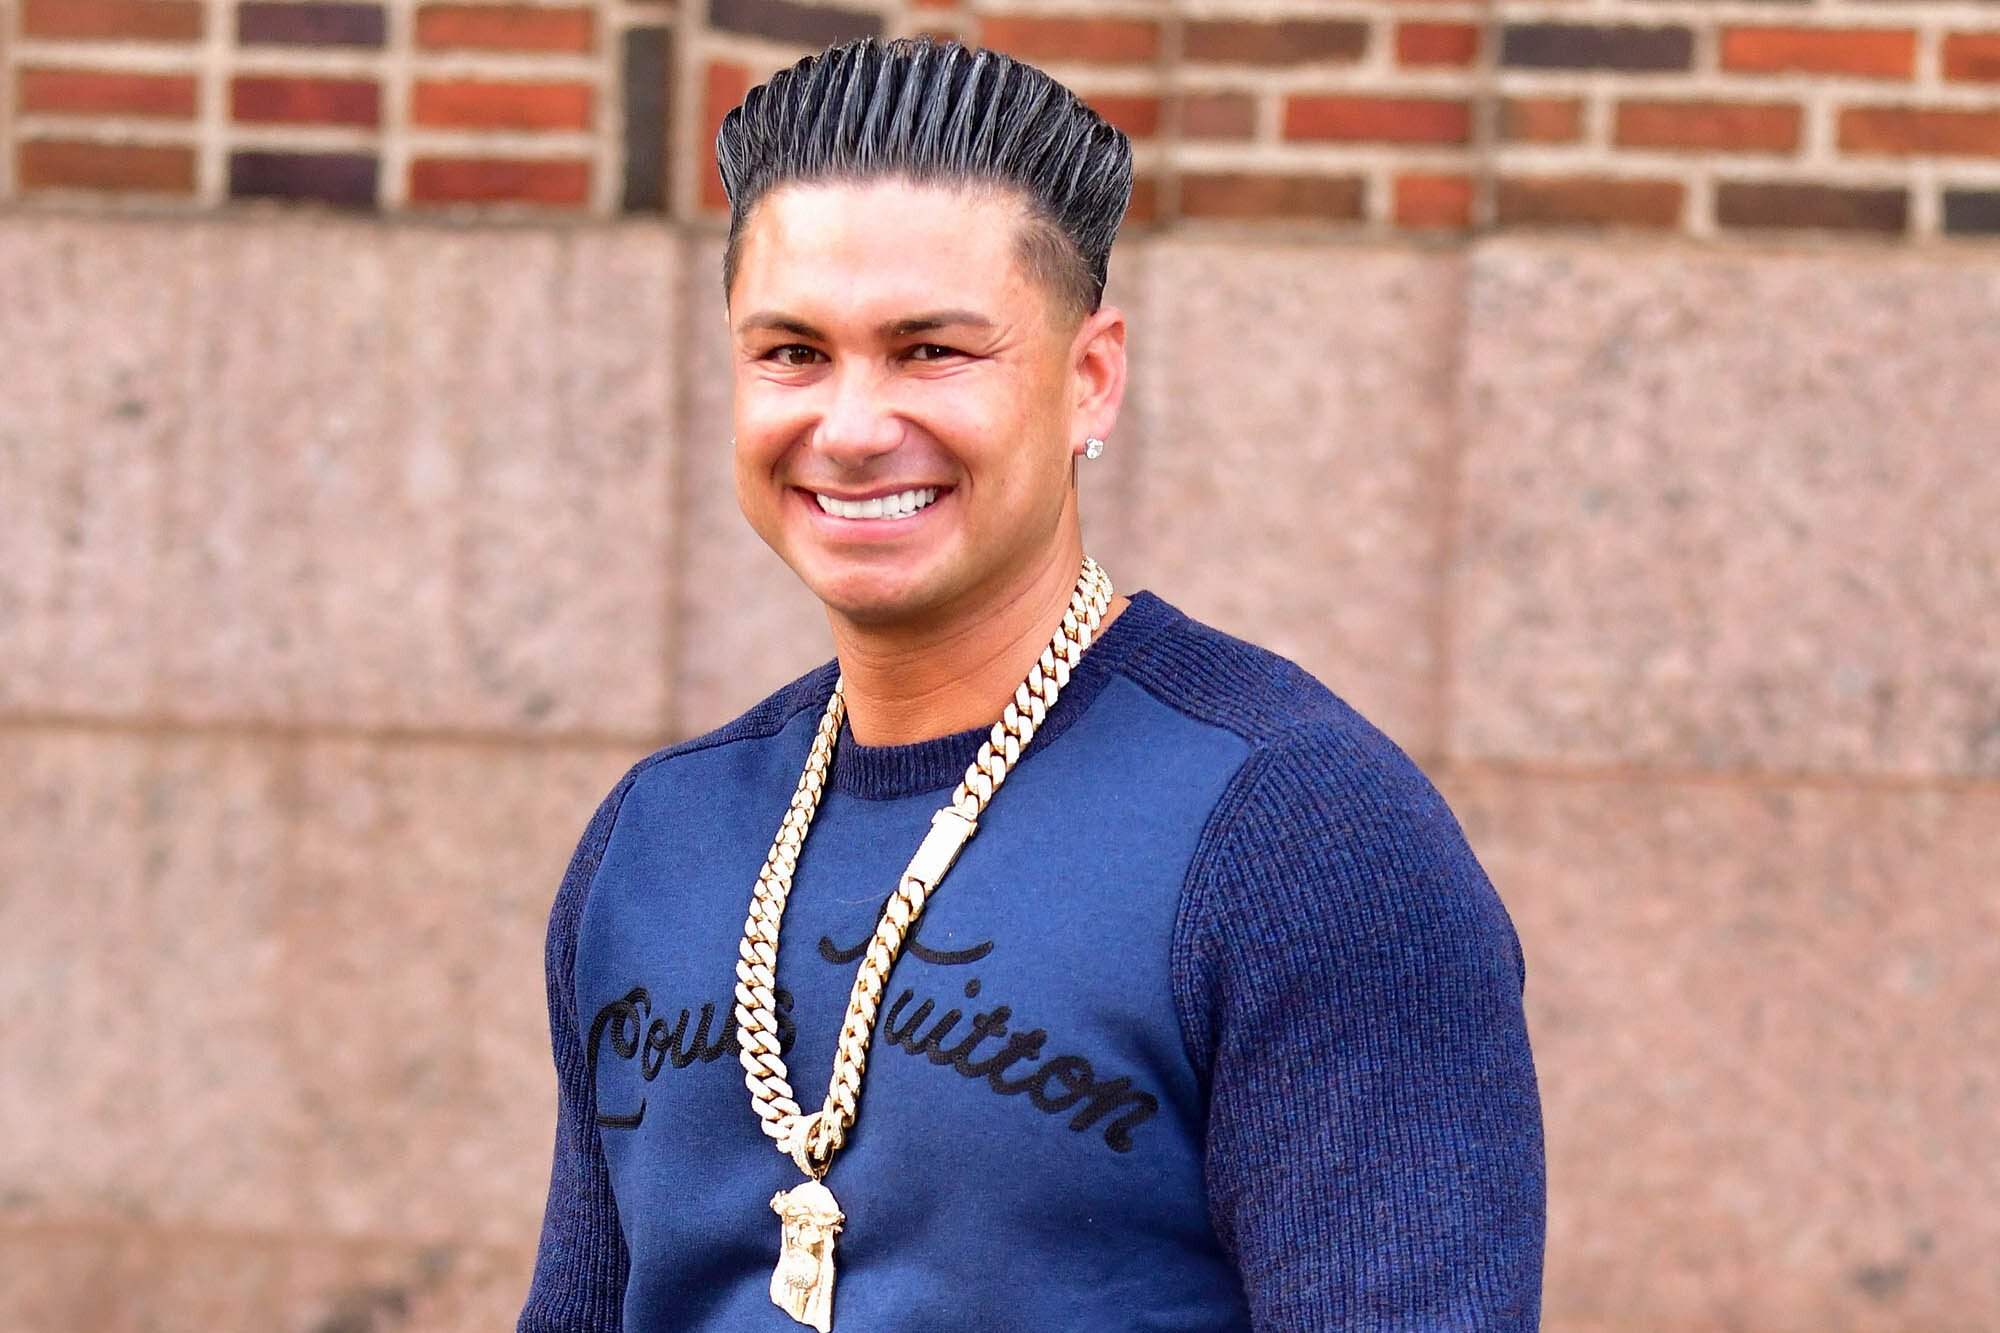 Mtv reality teaa on Instagram: Pauly D just recently celebrated